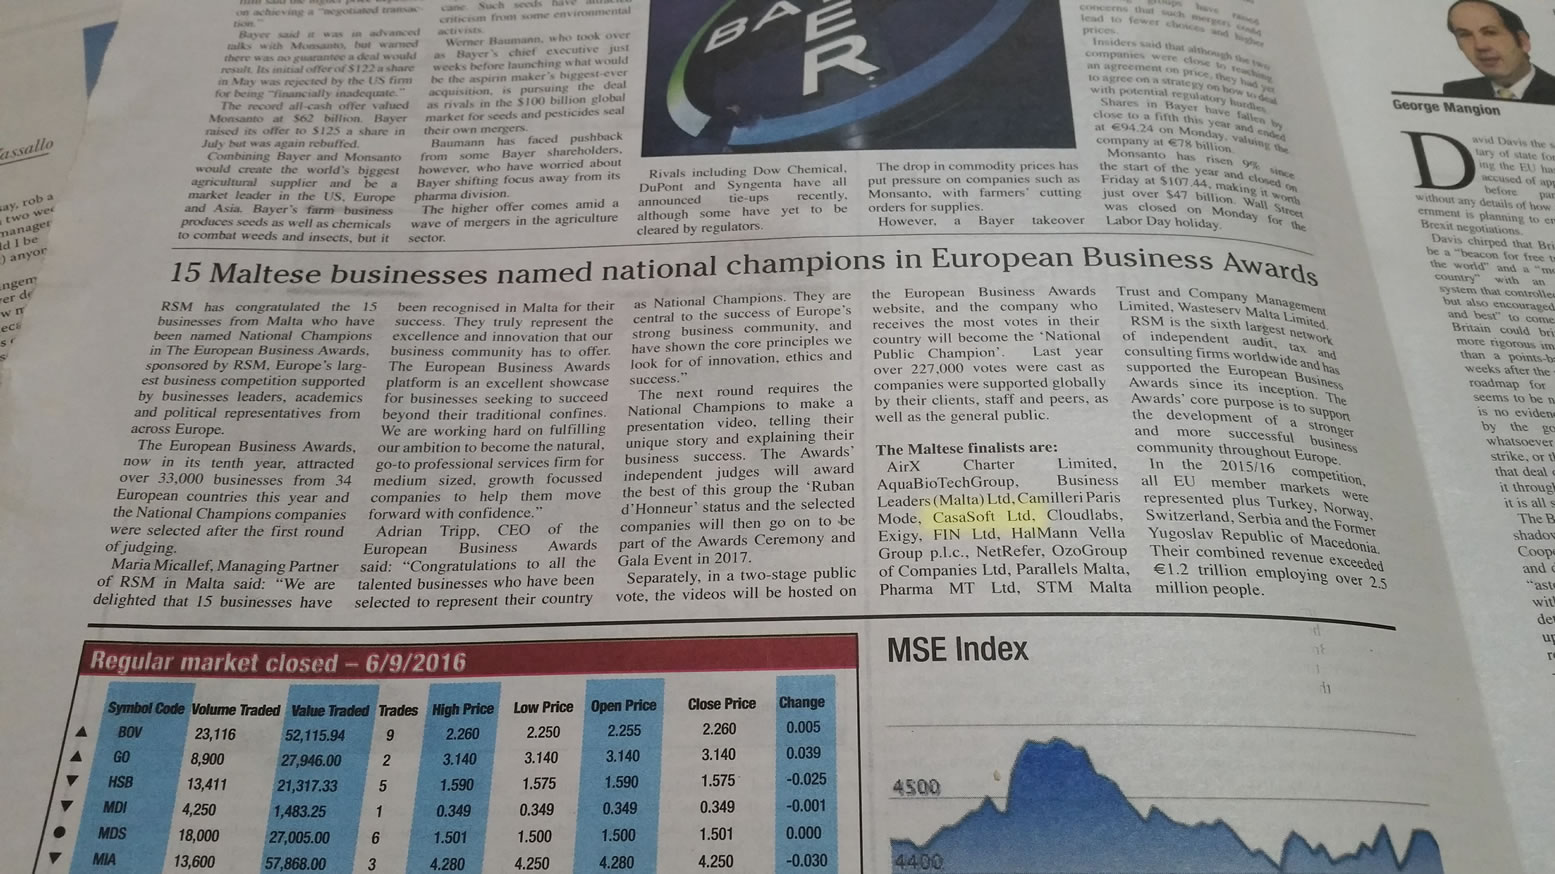 European Business Awards 2016/17 National Champions announcement article as featured on local newspaper, Malta Today